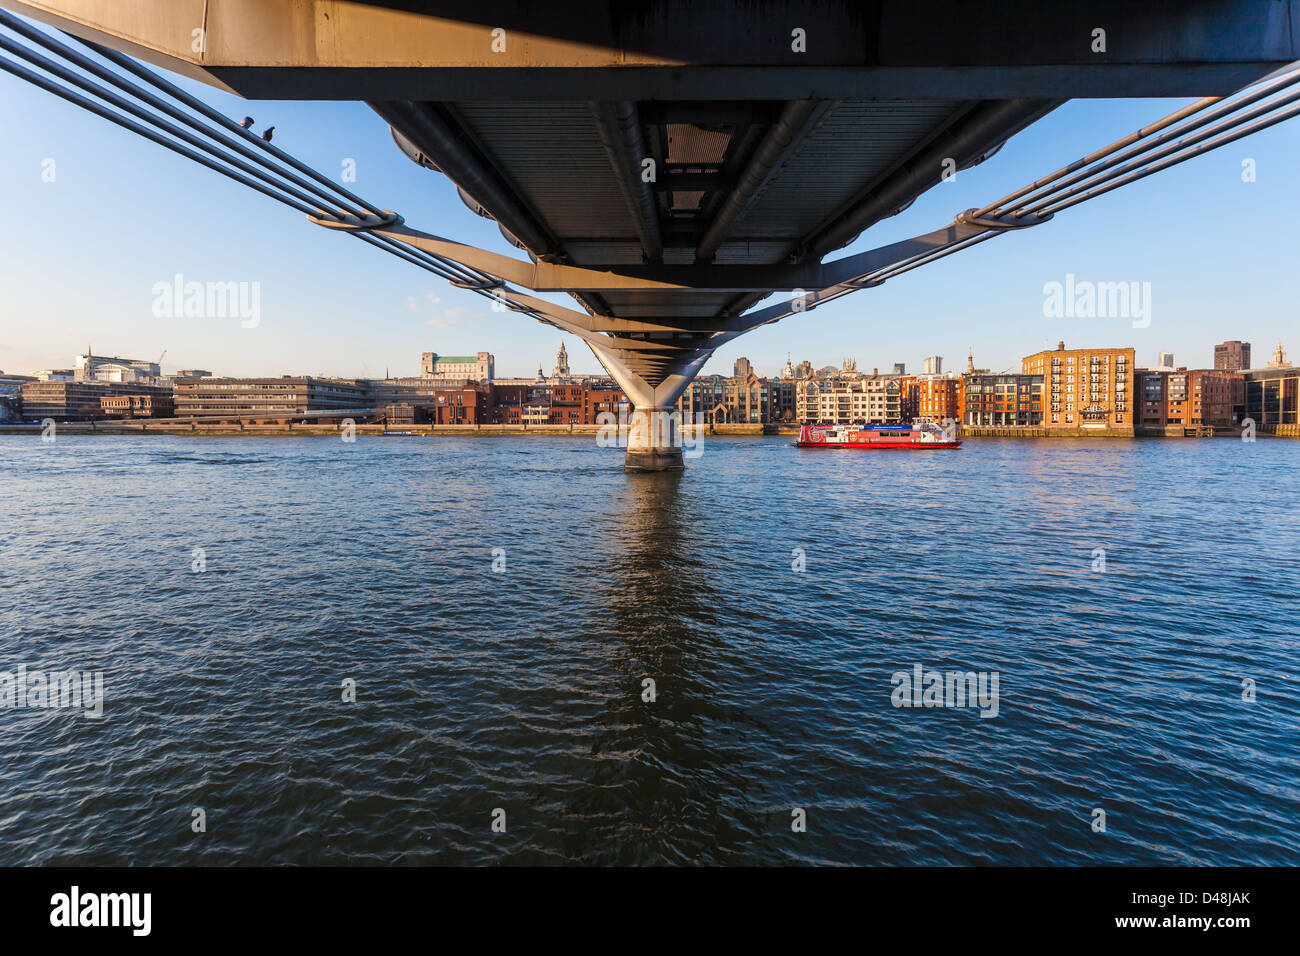 View of the River Thames from under the Millennium Bridge, South Bank, London, England, UK. Stock Photo